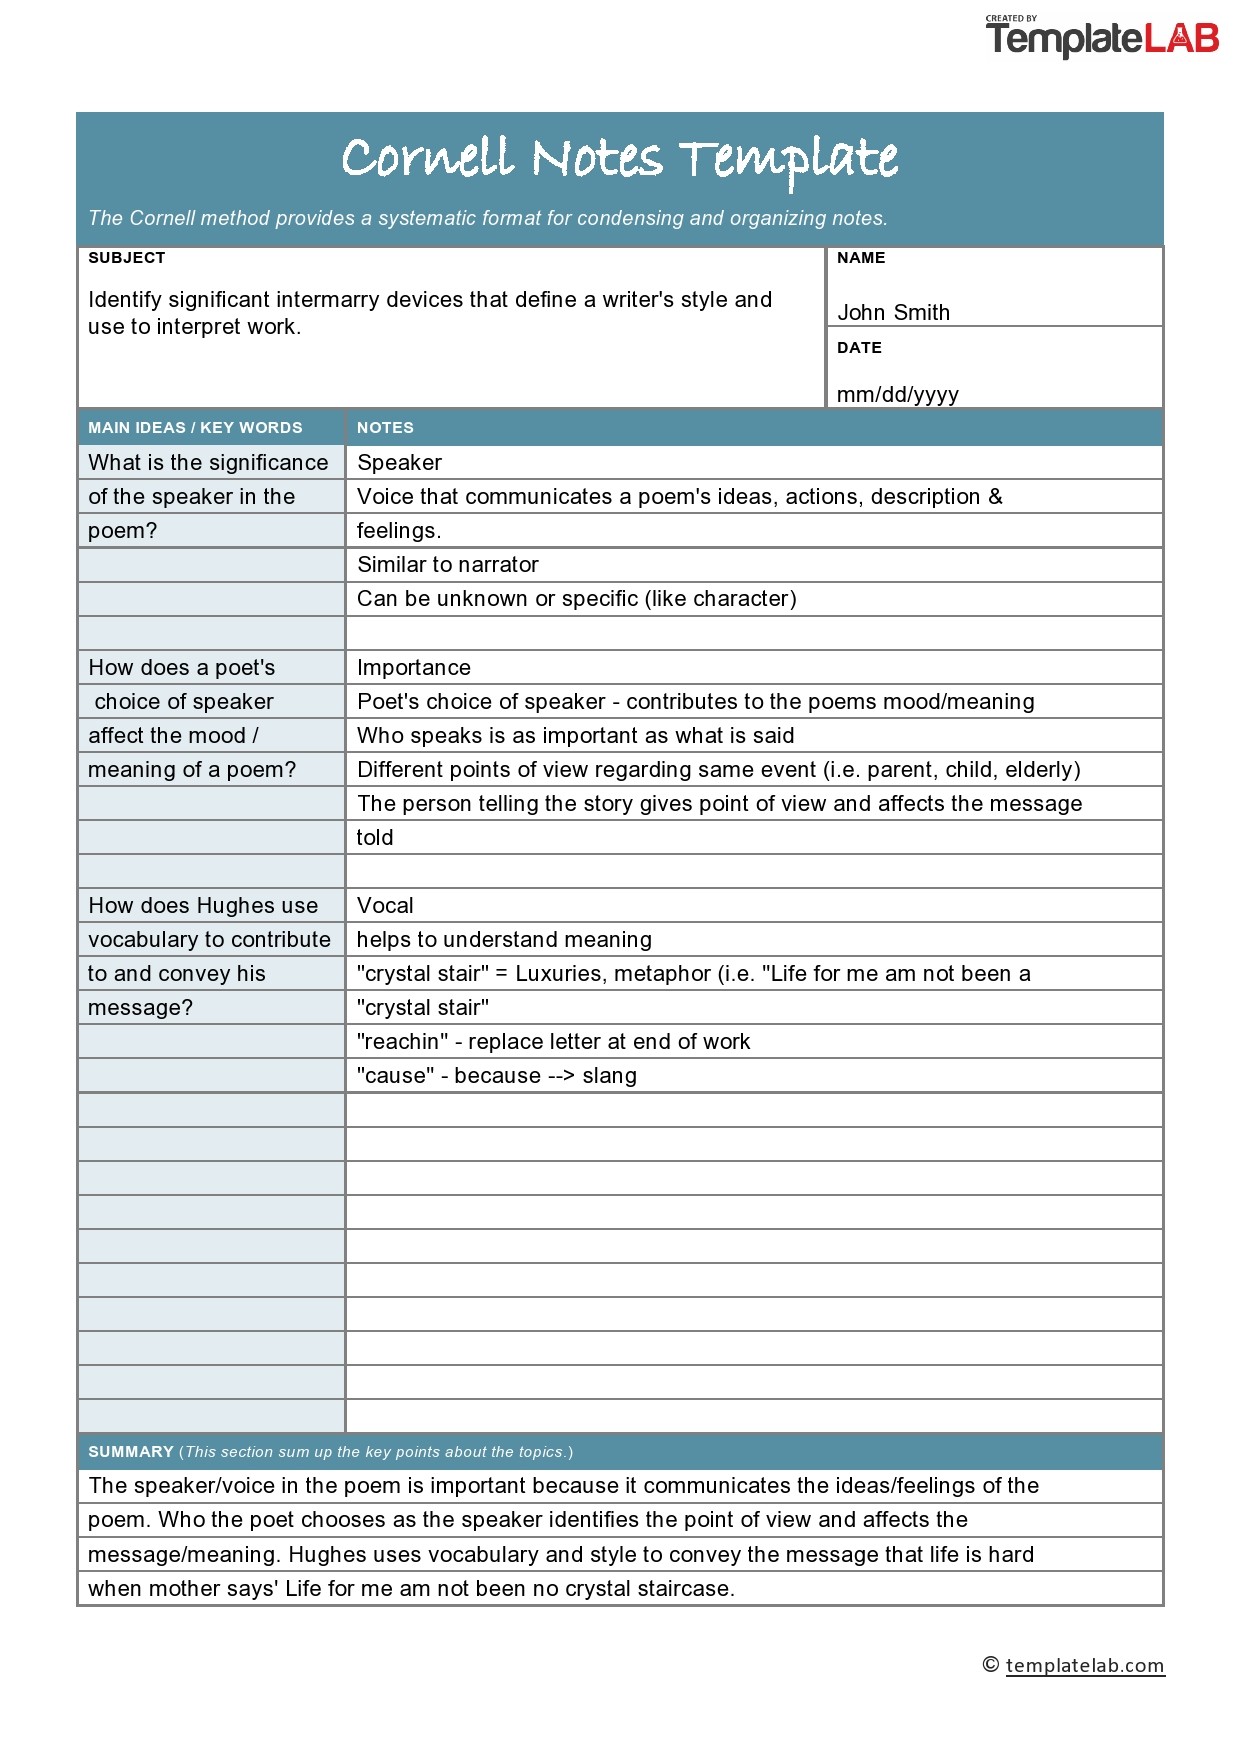 16 Printable Cornell Notes Templates Word Excel PDF 